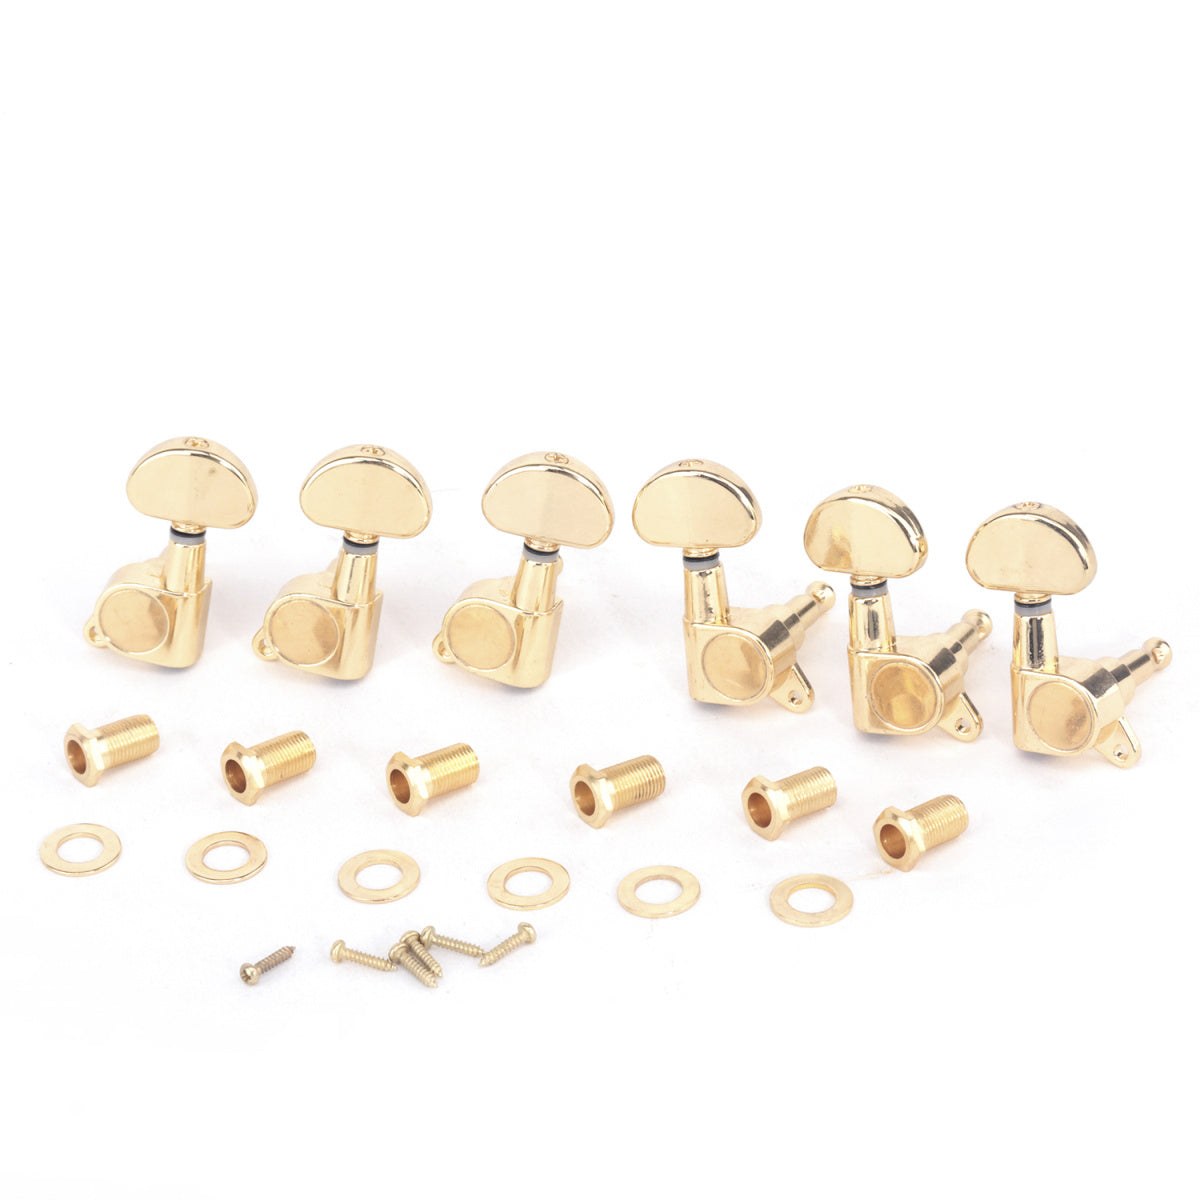 Musiclily Pro 3x3 Sealed Guitar Tuners Tuning Pegs Keys Machine Heads Set for Les Paul Style Guitar, Half Moon Button Gold